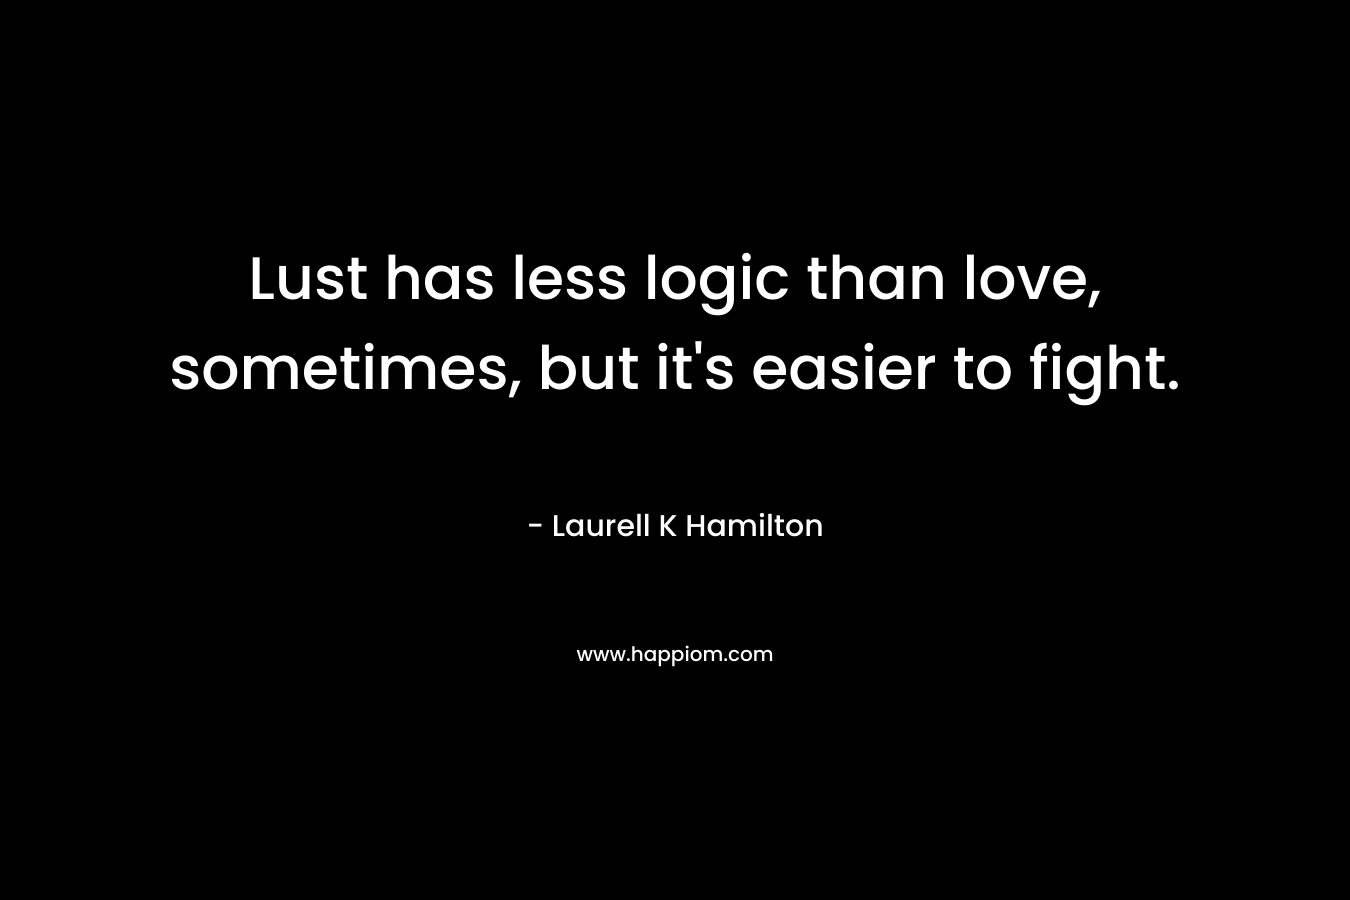 Lust has less logic than love, sometimes, but it's easier to fight.